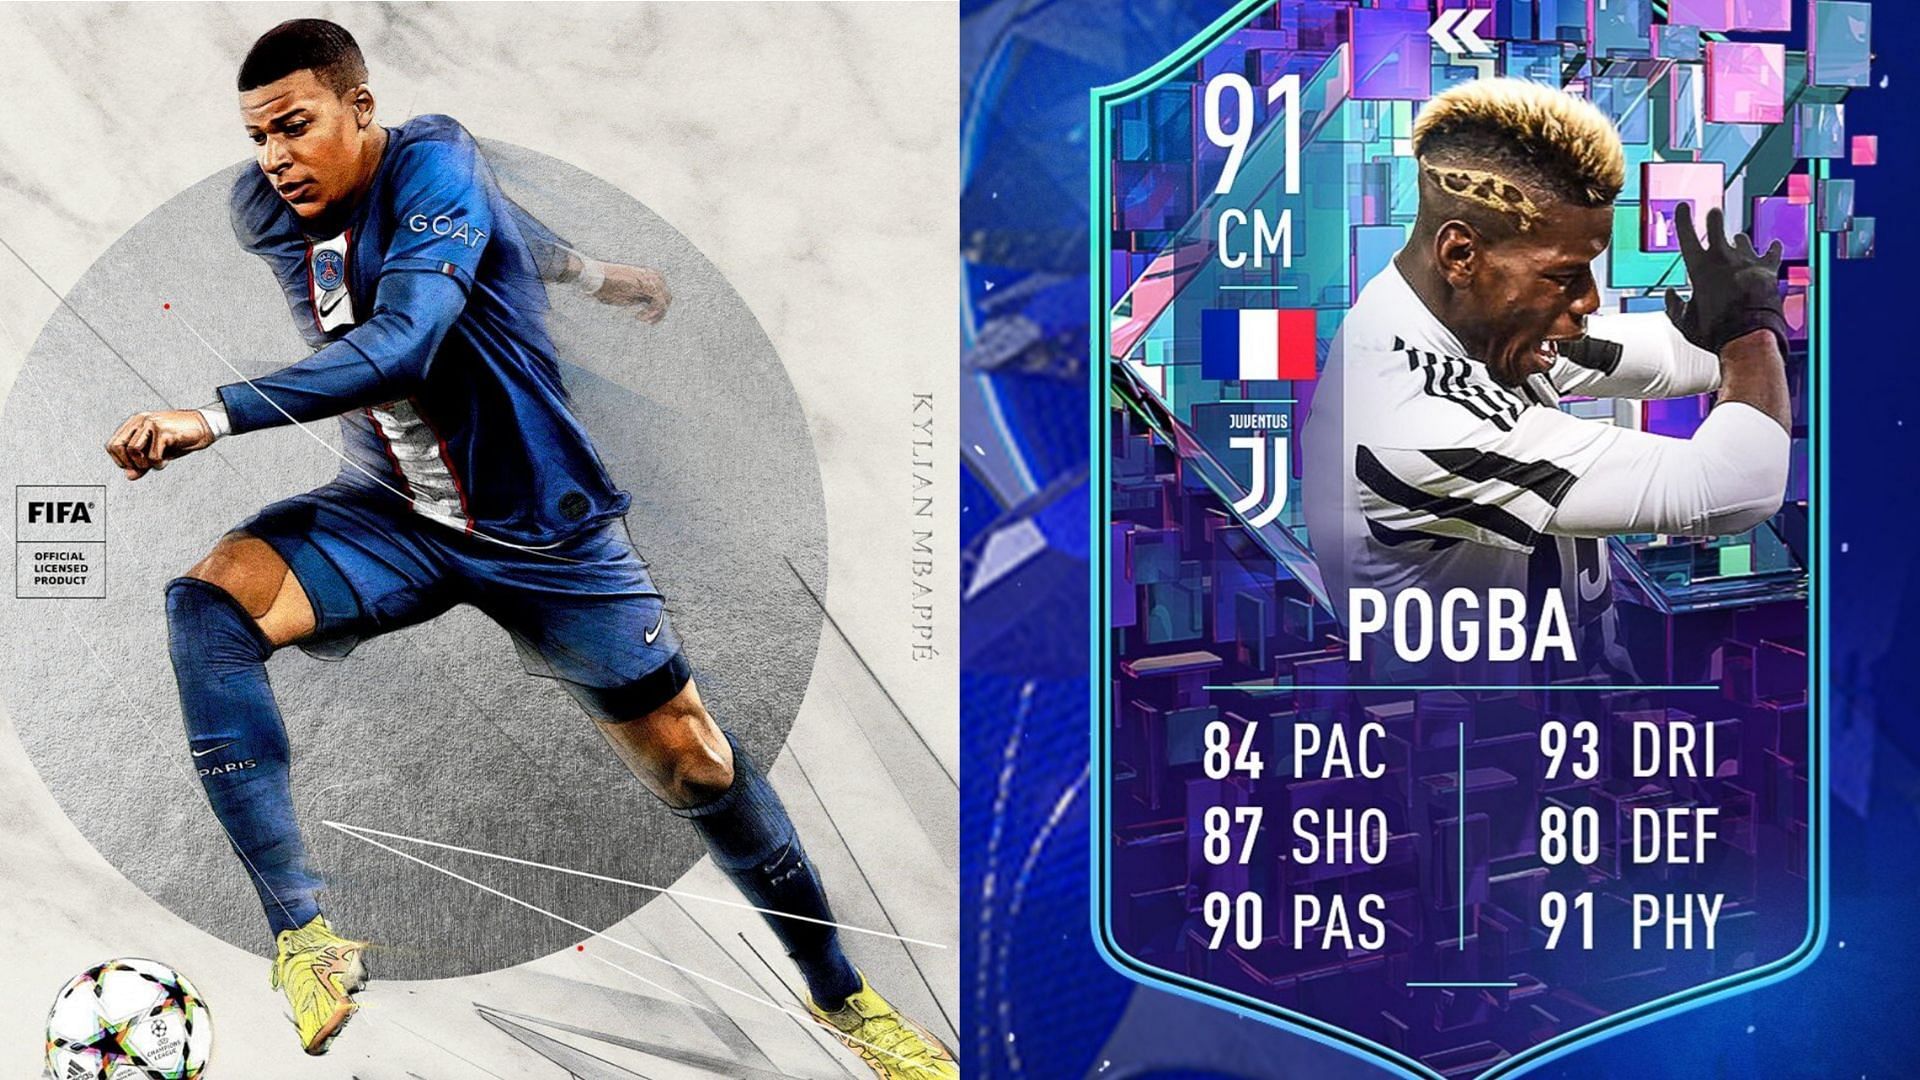 Reply to @lcs.ig How to style Paul Pogba #fifa22 #pogba #drip #swag